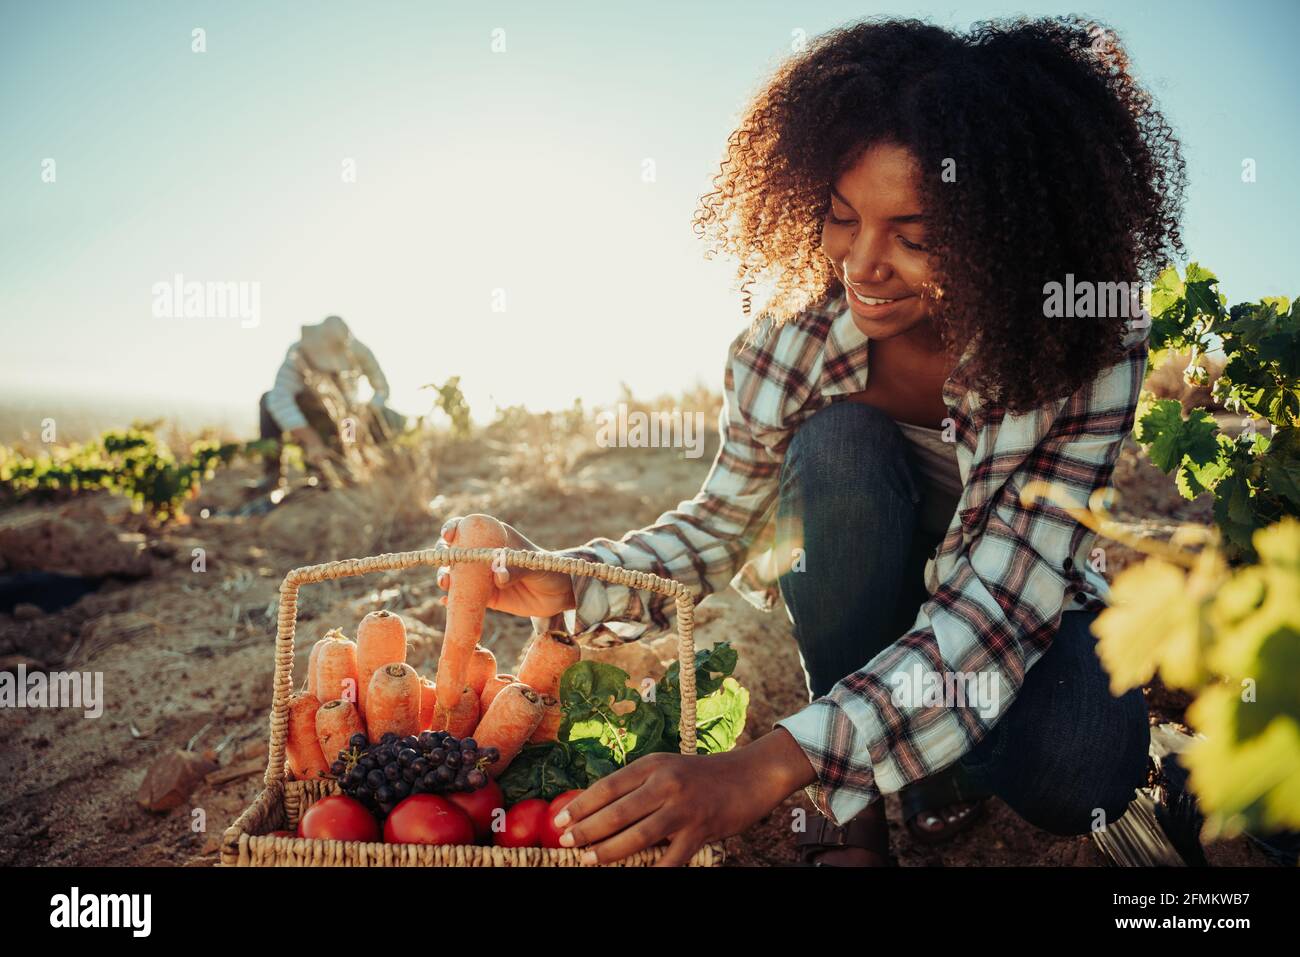 Mixed race female farmer smiling gathering fresh produce while male colleague harvests Stock Photo